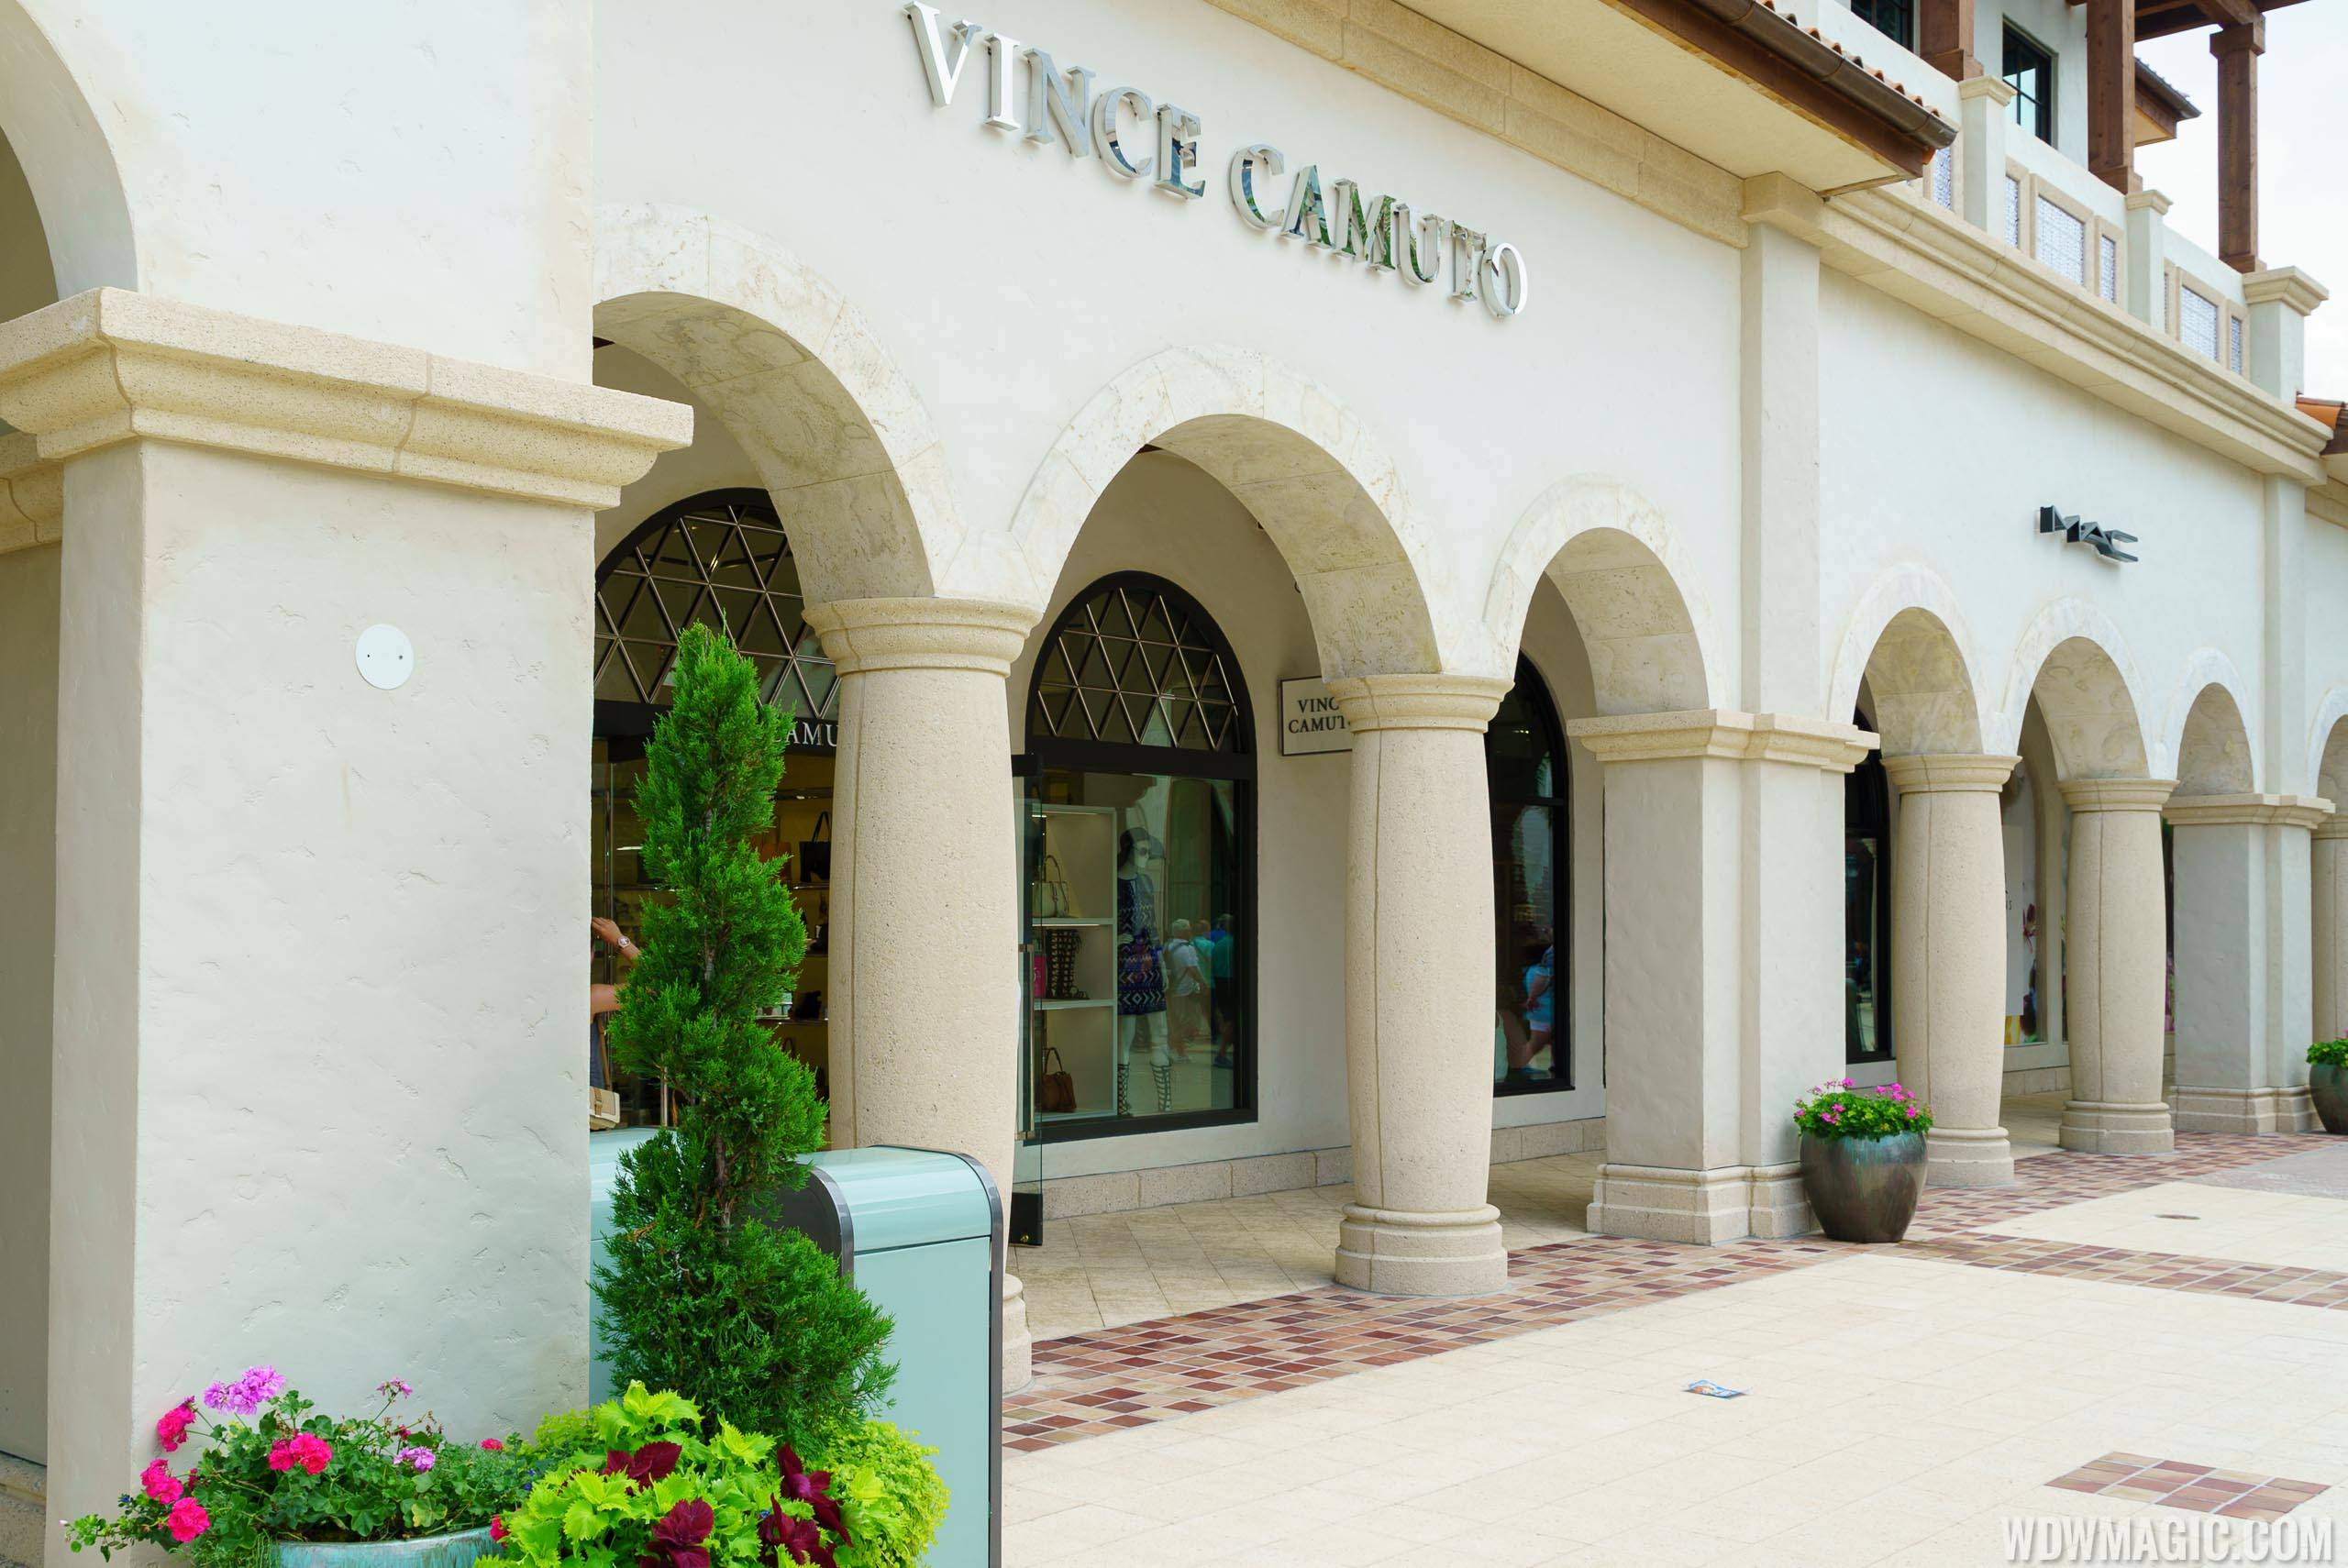 Vince Camuto overview